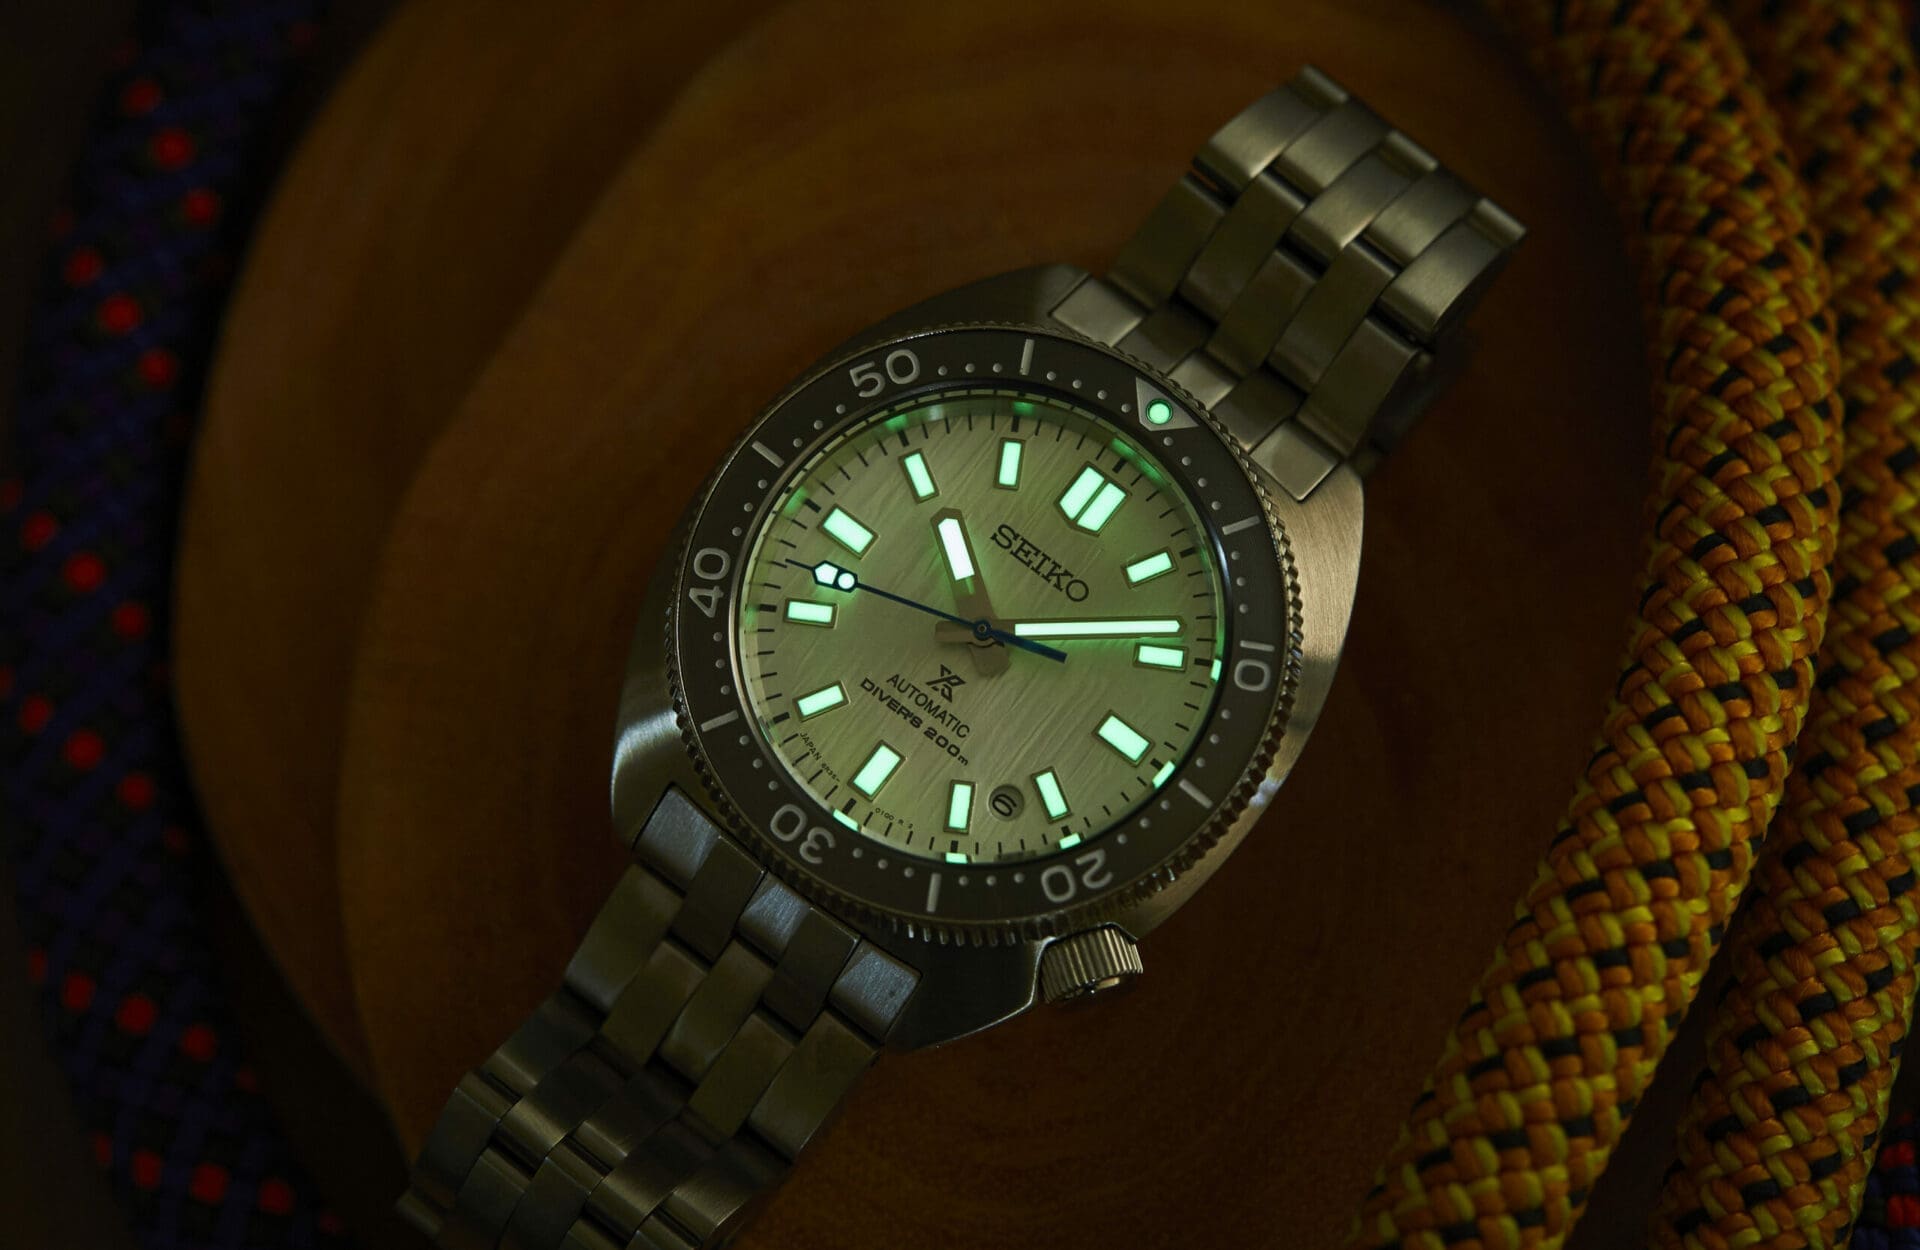 HANDS-ON: The Seiko SPB333 Save The Ocean Limited Edition